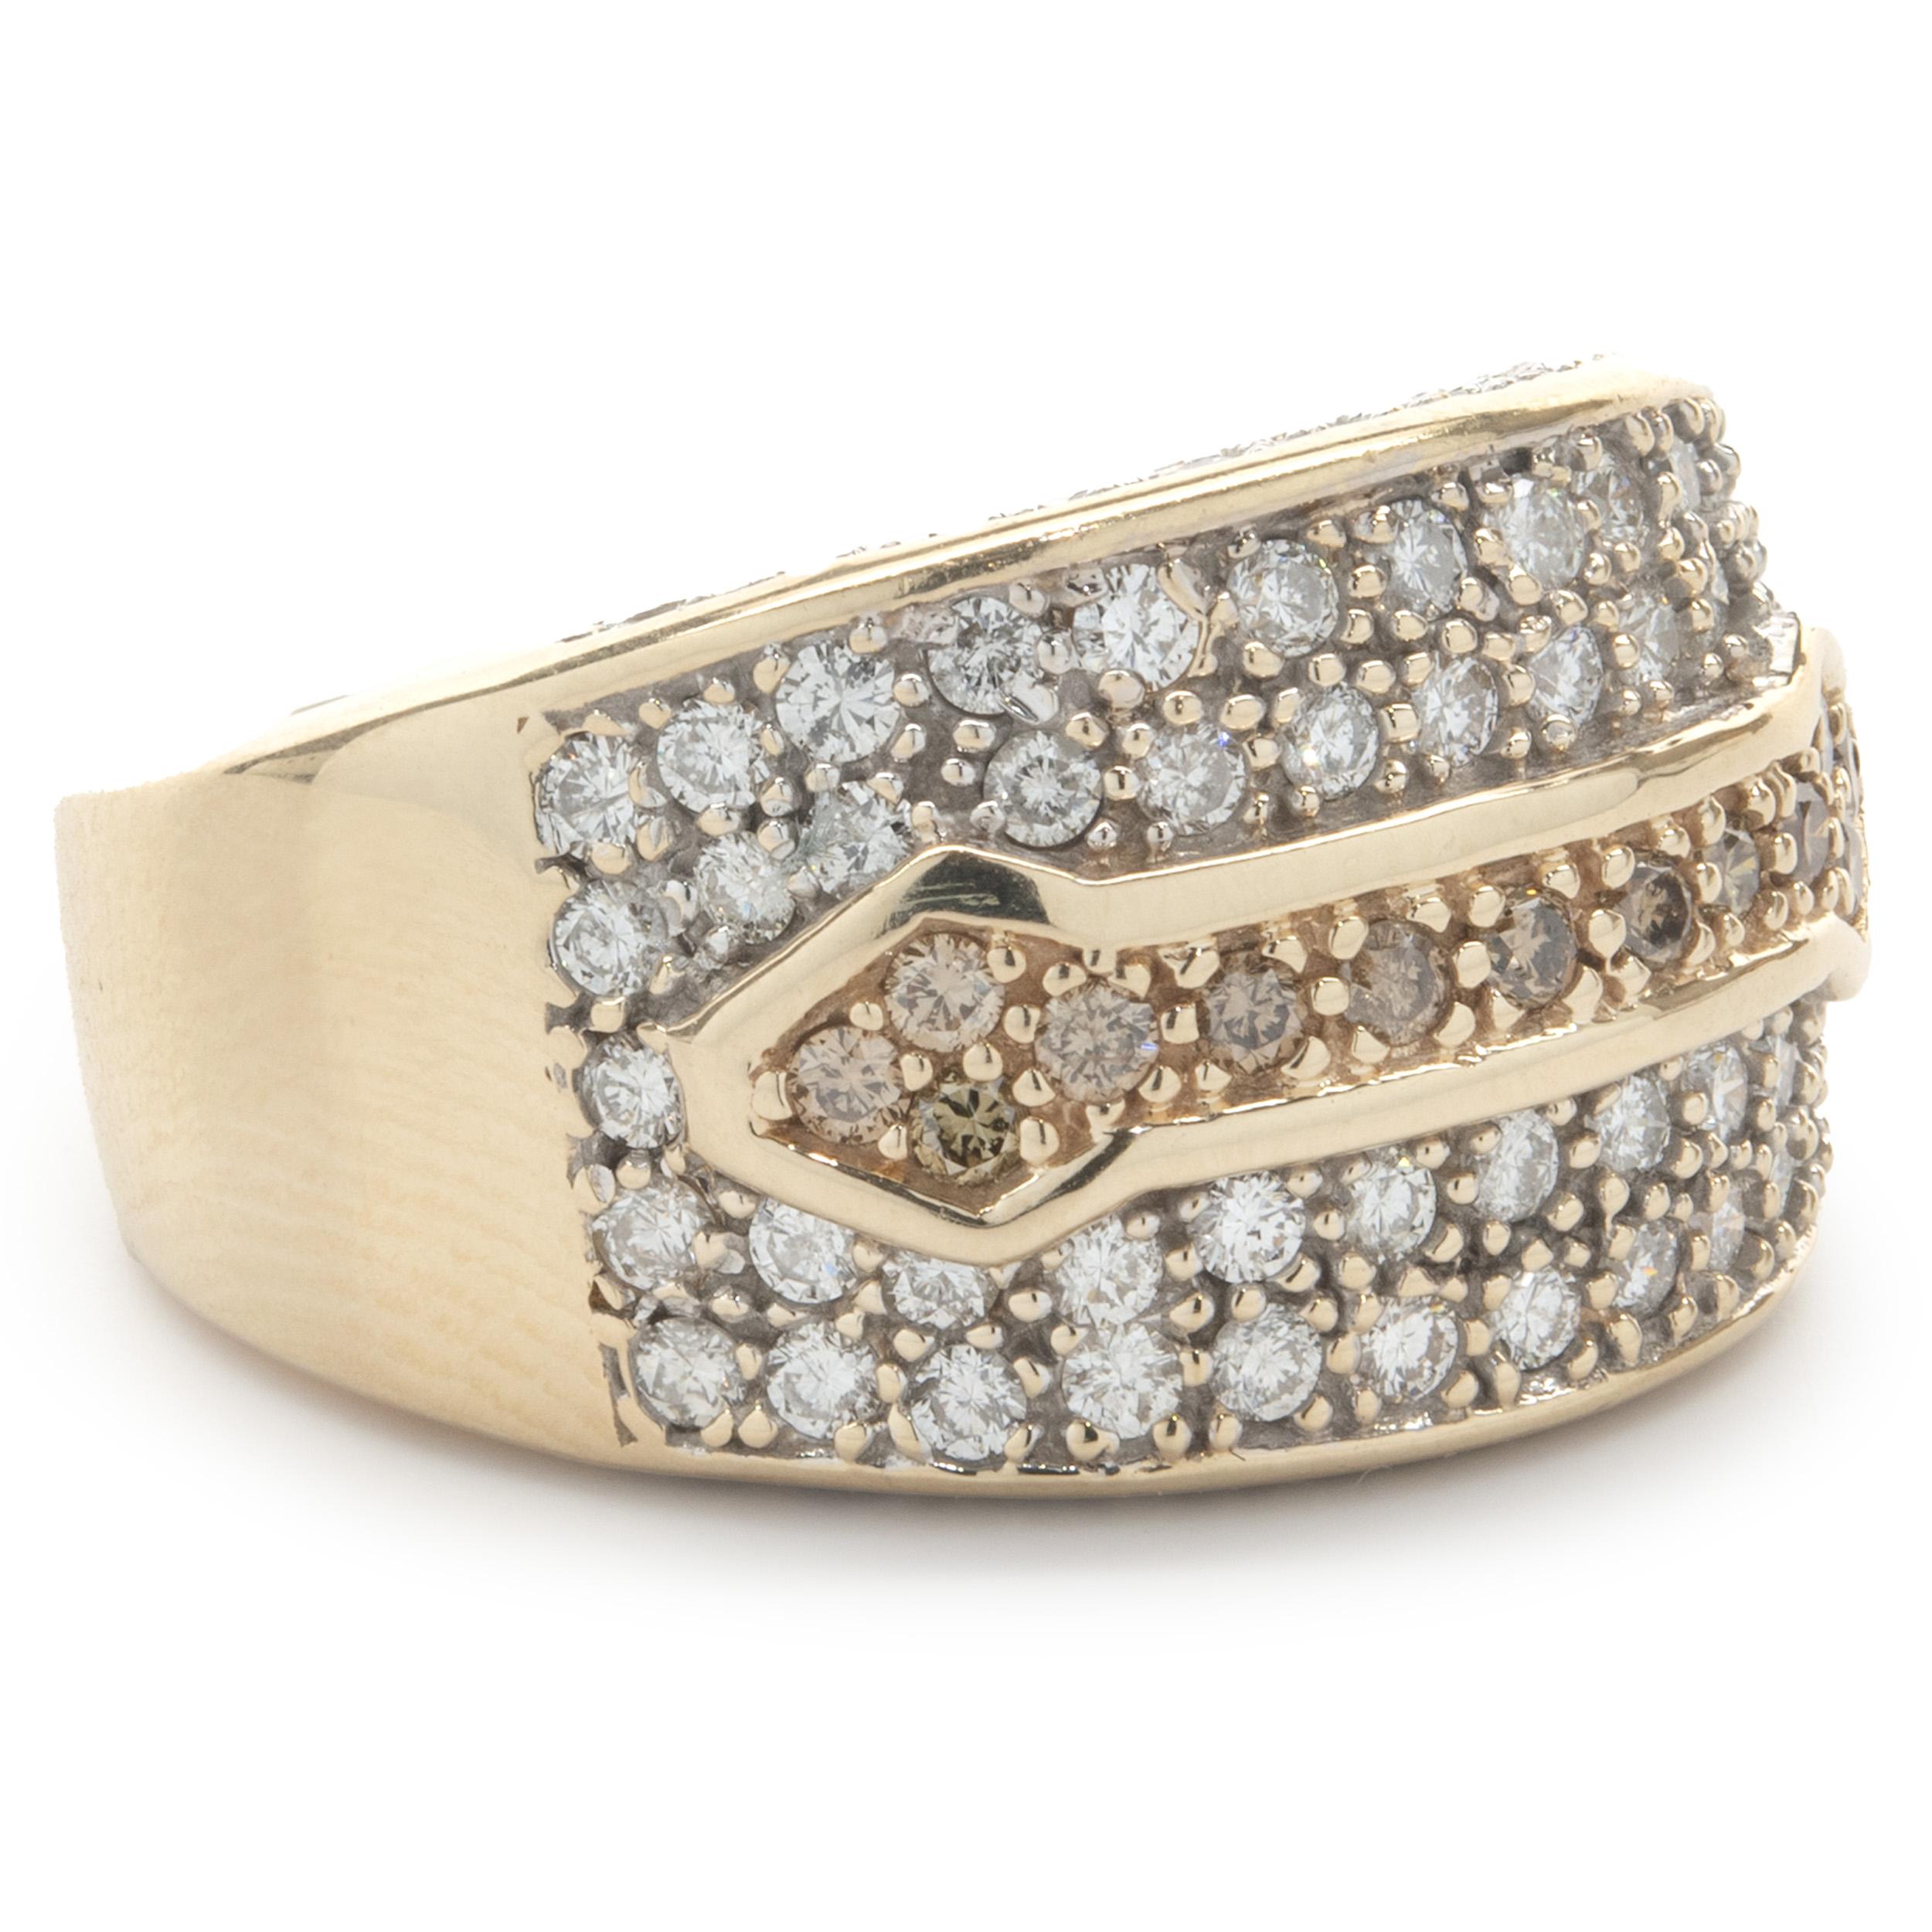 Designer: custom design
Material: 14K yellow gold
Diamonds: round brilliant cut = 1.34cttw
Color: H / Champagne
Clarity: SI1
Dimensions: ring top measures 13mm wide
Weight: 10.58 grams